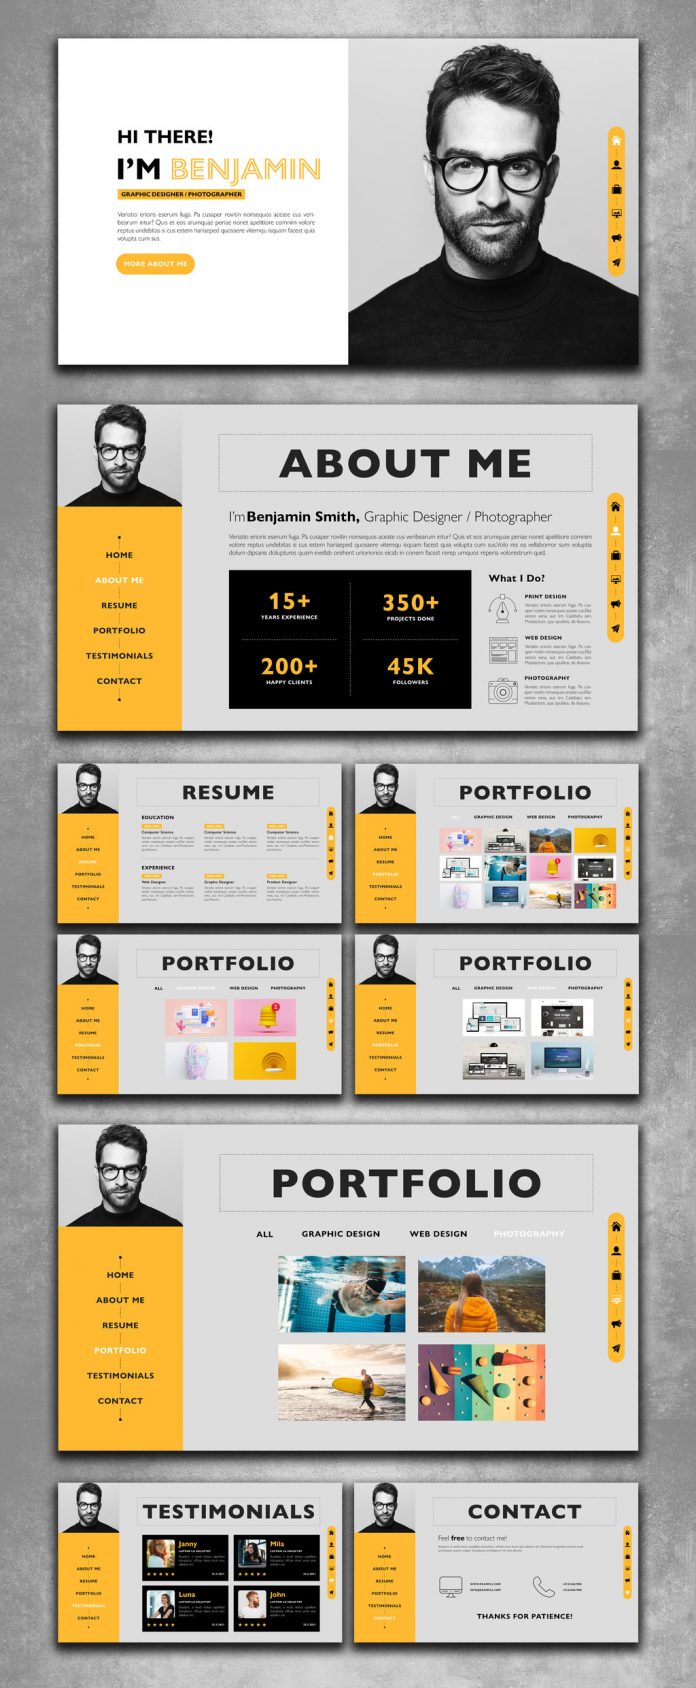 Interactive PDF Resume Template for Adobe InDesign